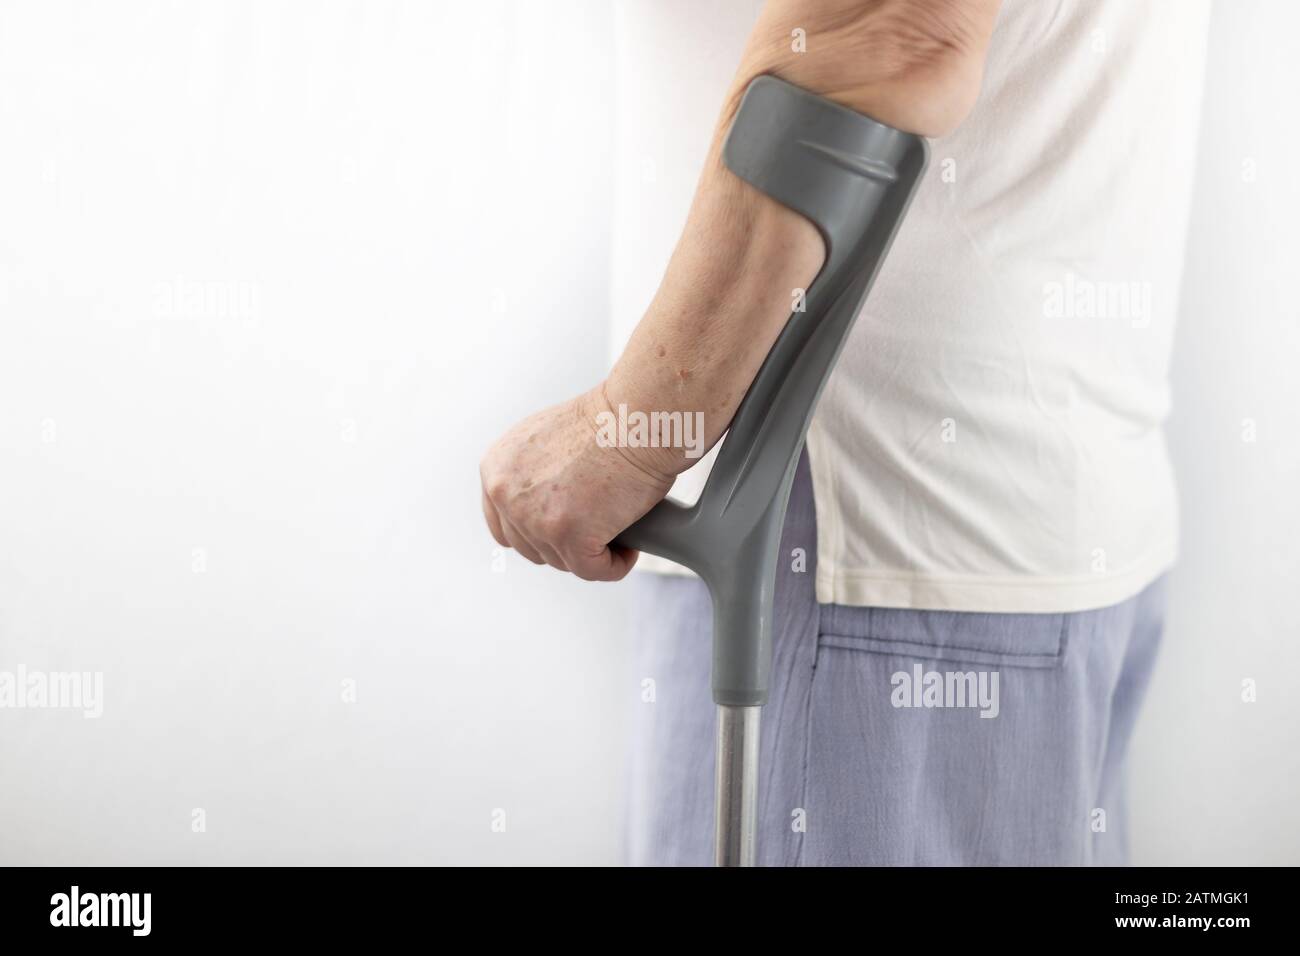 Person with medical walking stick, crutches over white background Stock Photo